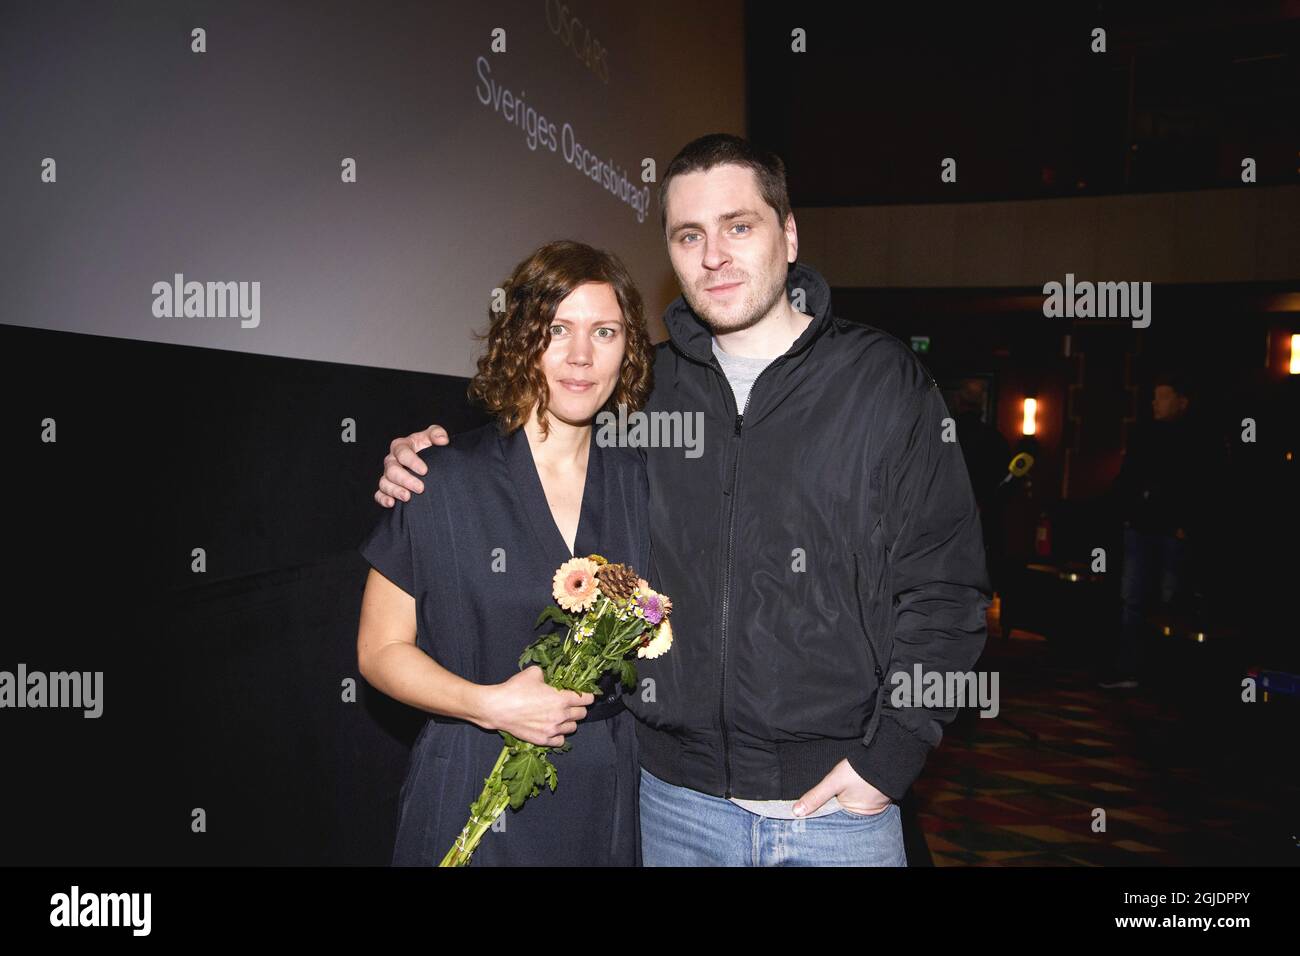 Director Amanda Kernell and actor Sverrir Gudnason in Stockholm, Sweden, November 03, 2020, after the announcement that their film 'Charter' has been chosen as the Swedish submission for the Academy Award for Best International Feature Film Photo: Jessica Gow / TT code 10070  Stock Photo